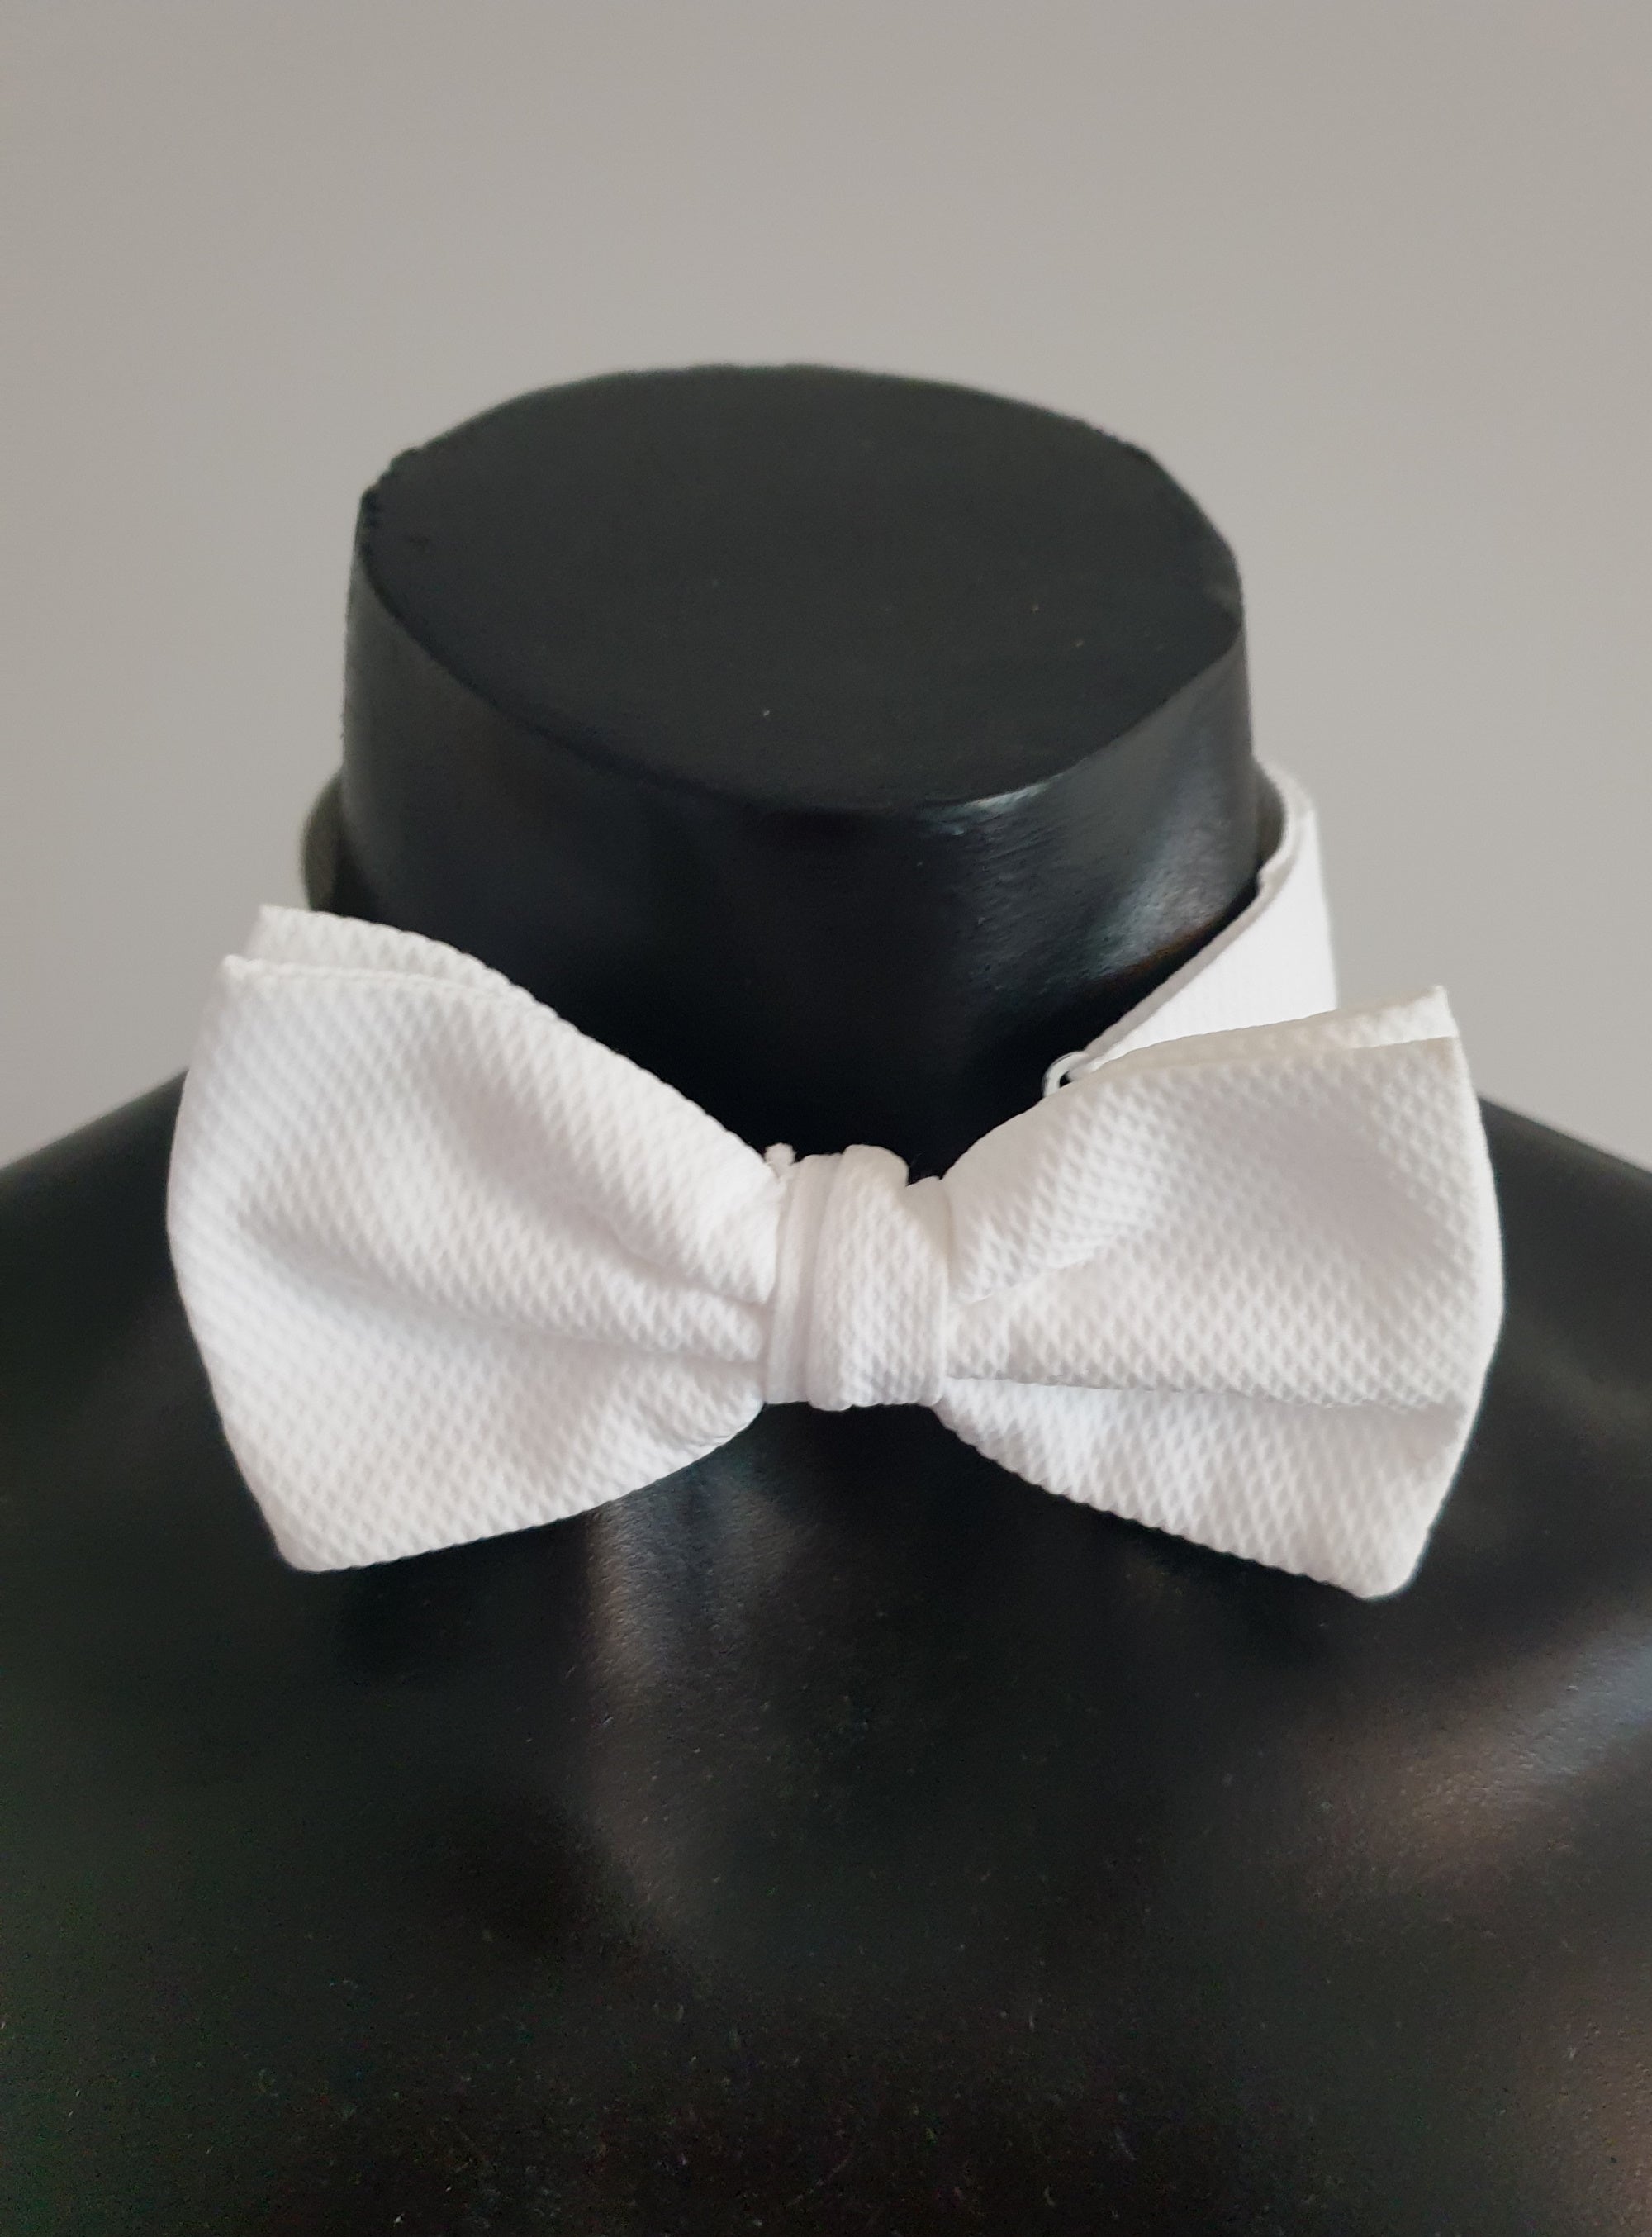 front fastening vintage white marcella bow tie